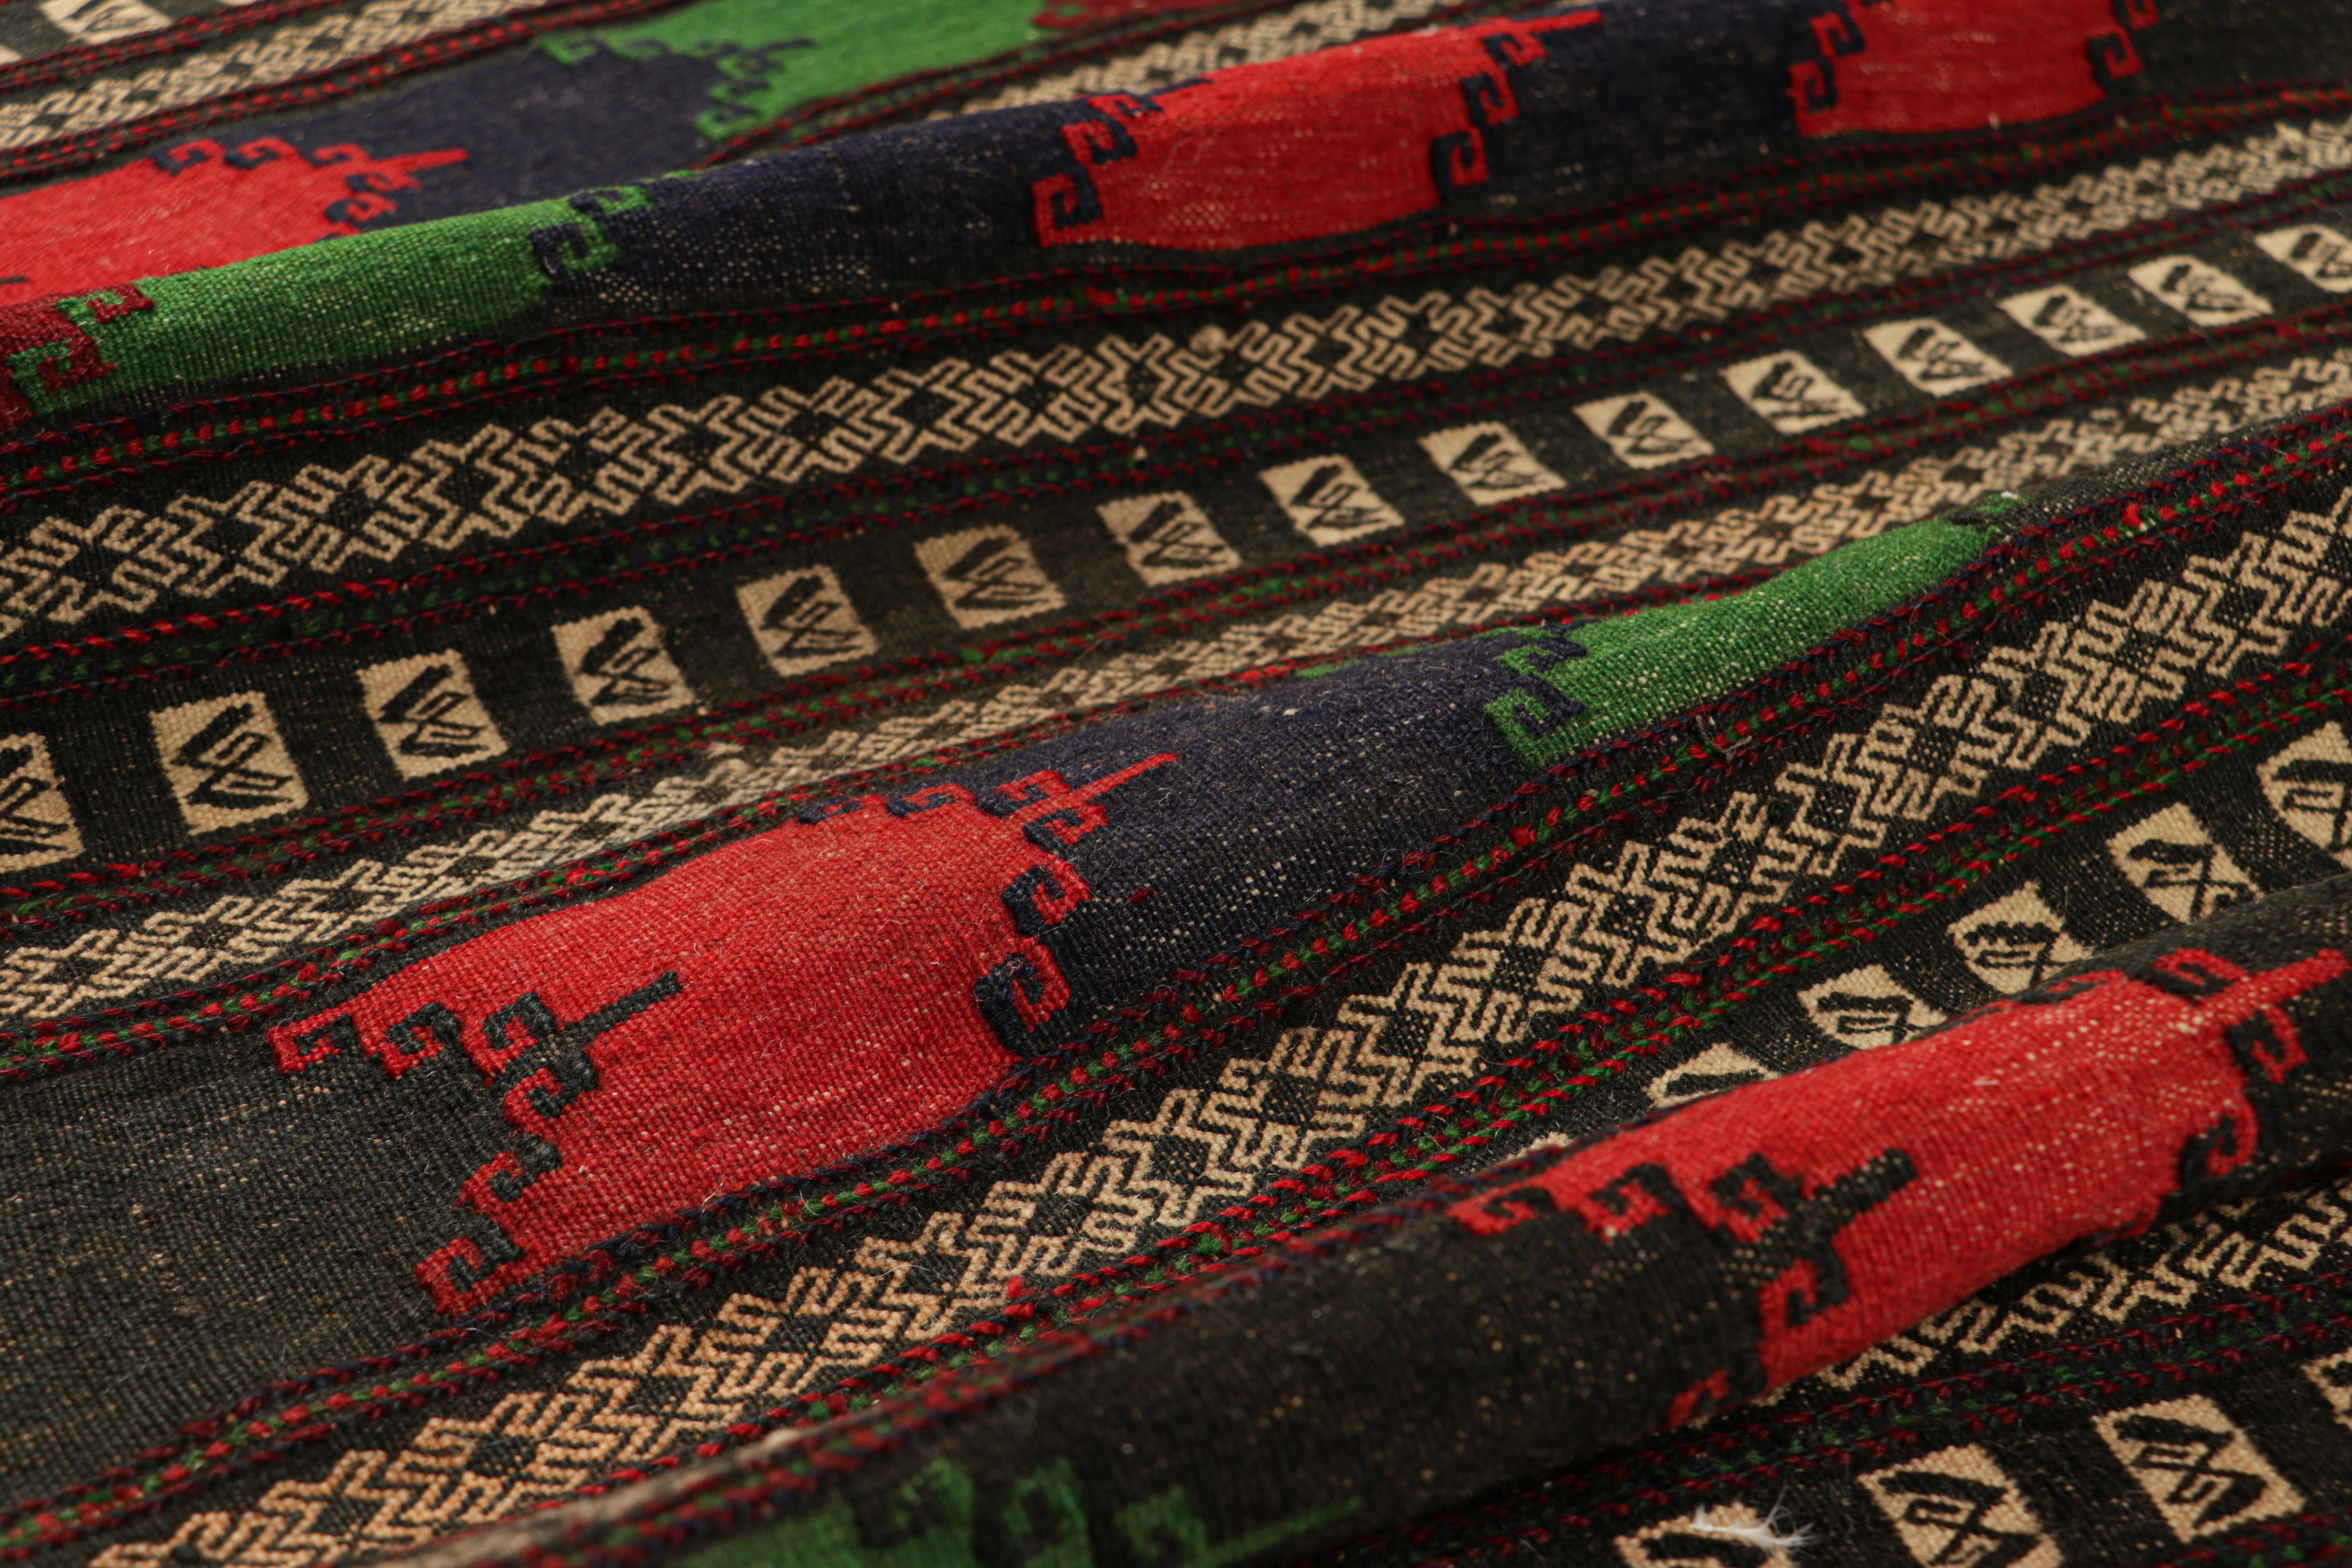 Hand-Woven Vintage Afghan Kilim, with Polychromatic Striped Patterns from Rug & Kilim For Sale